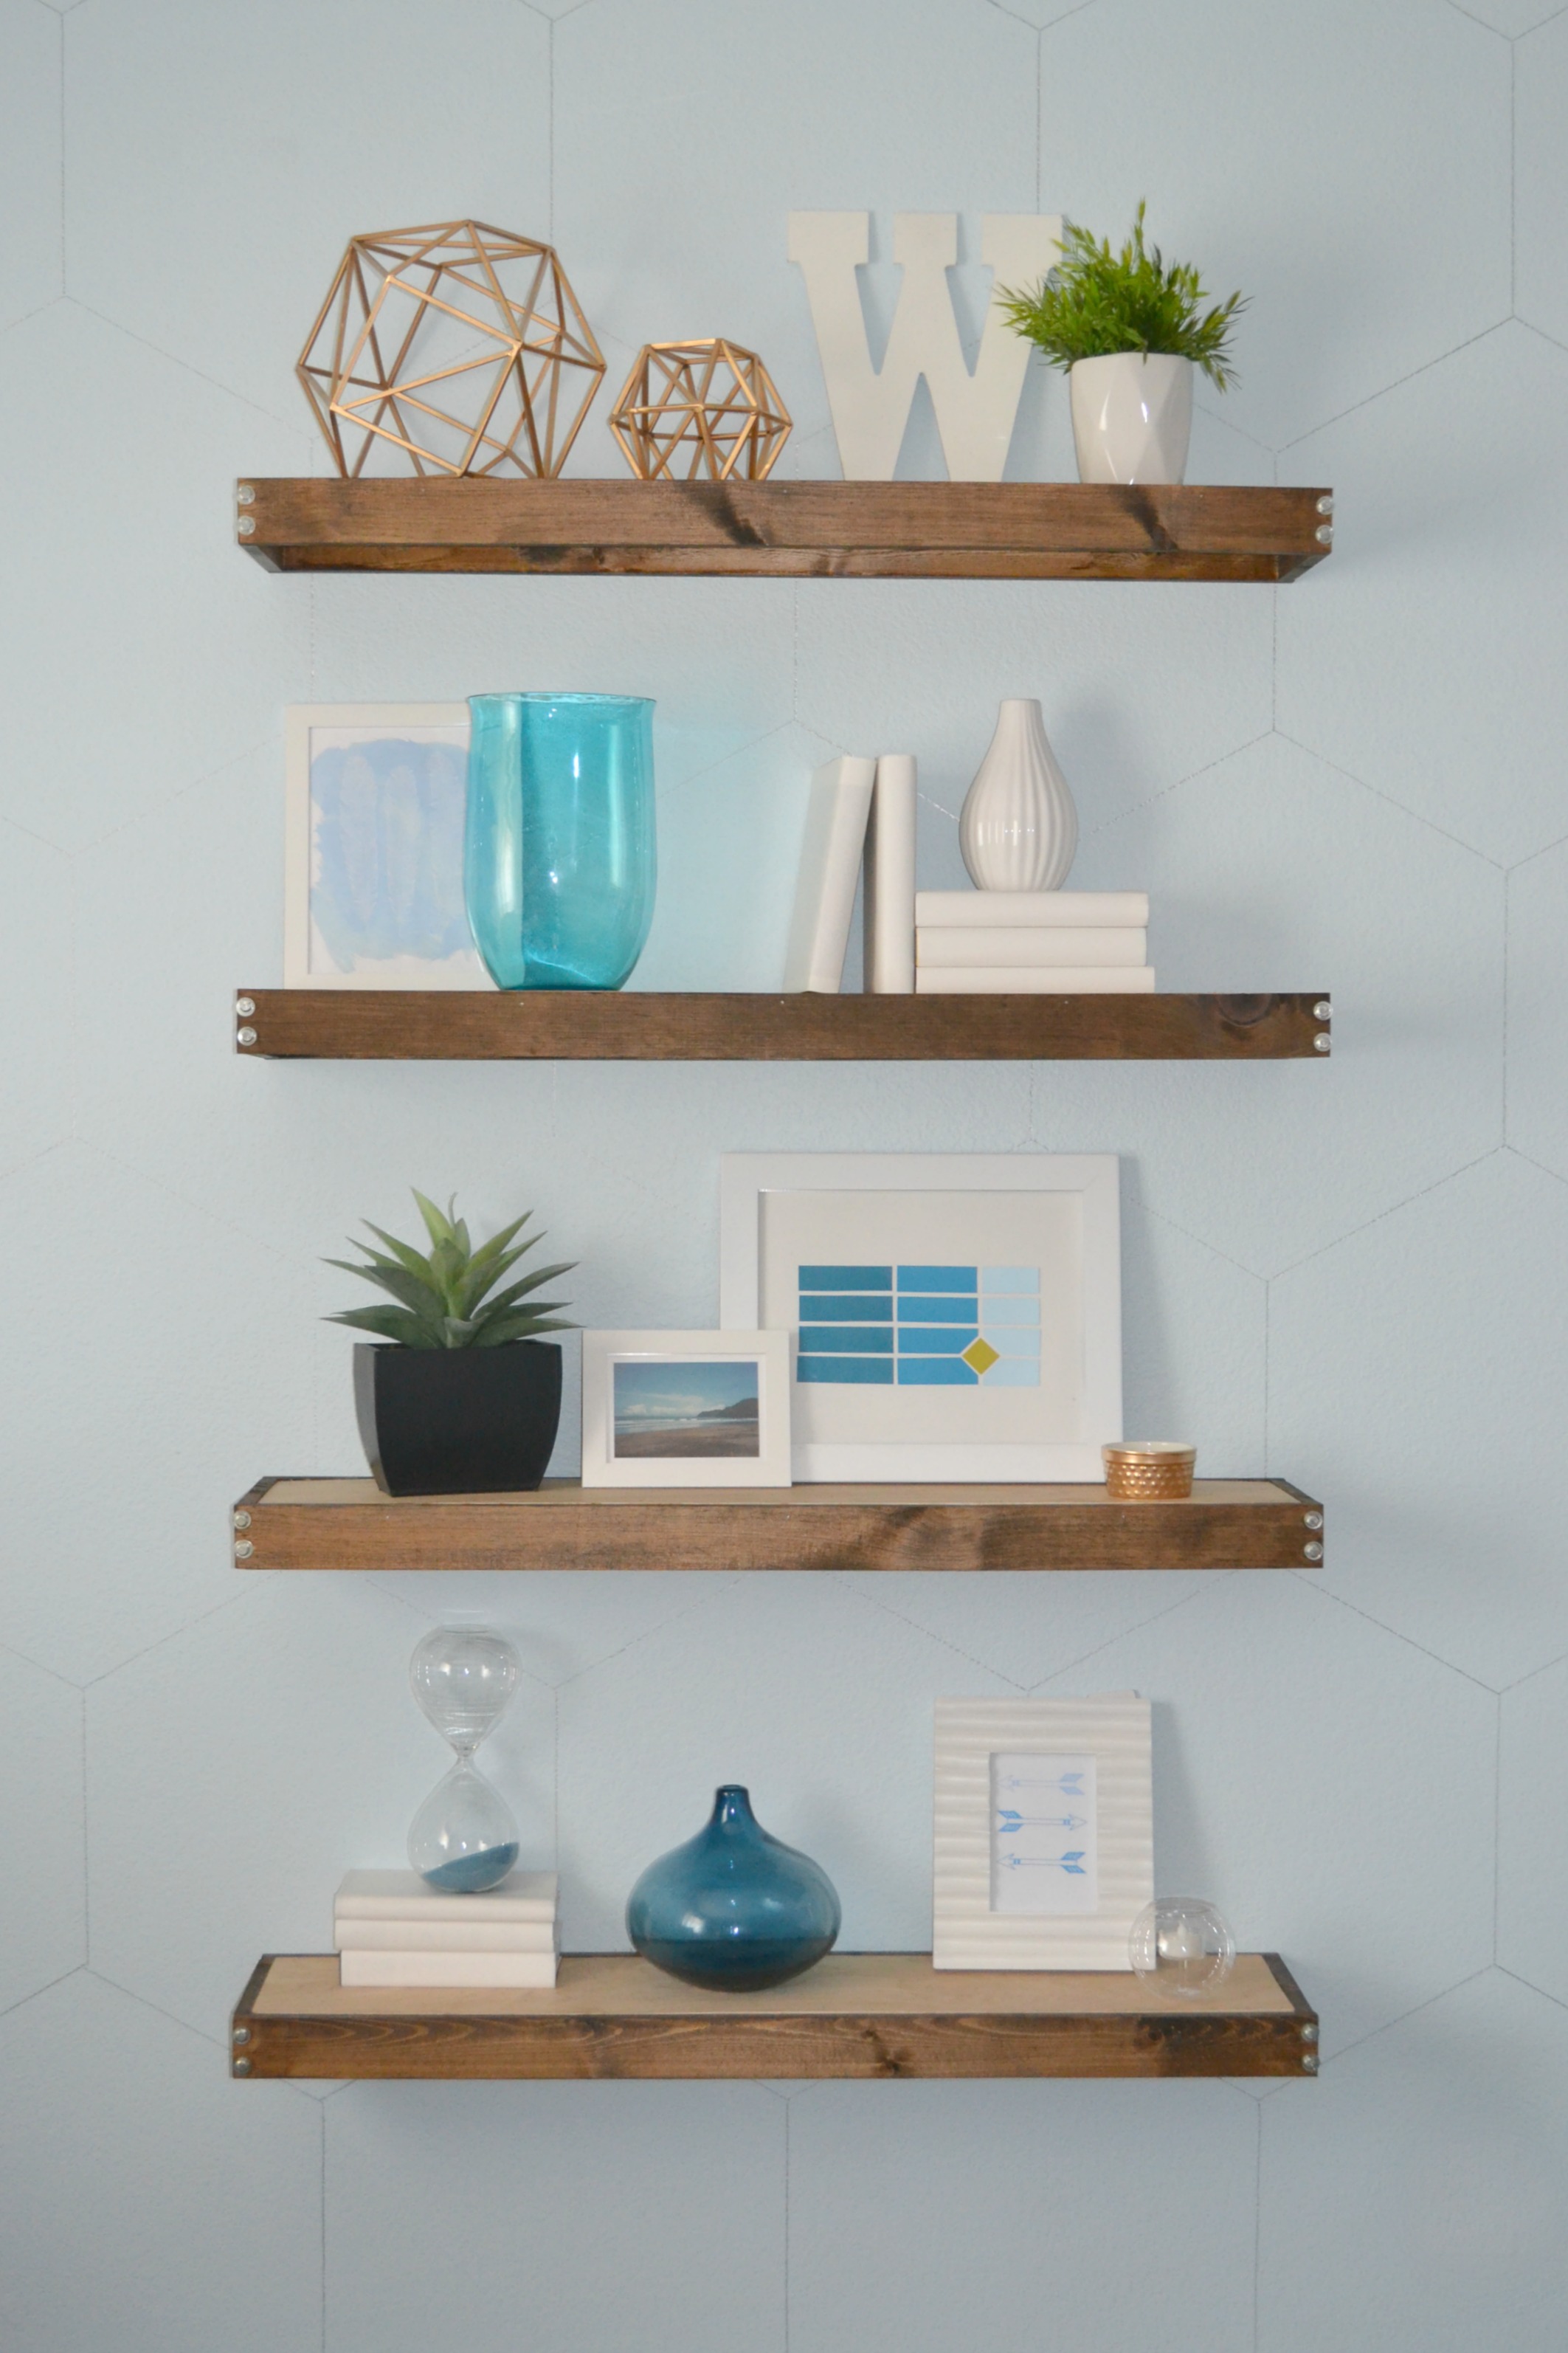 Top Floating Shelves – Diy Projects